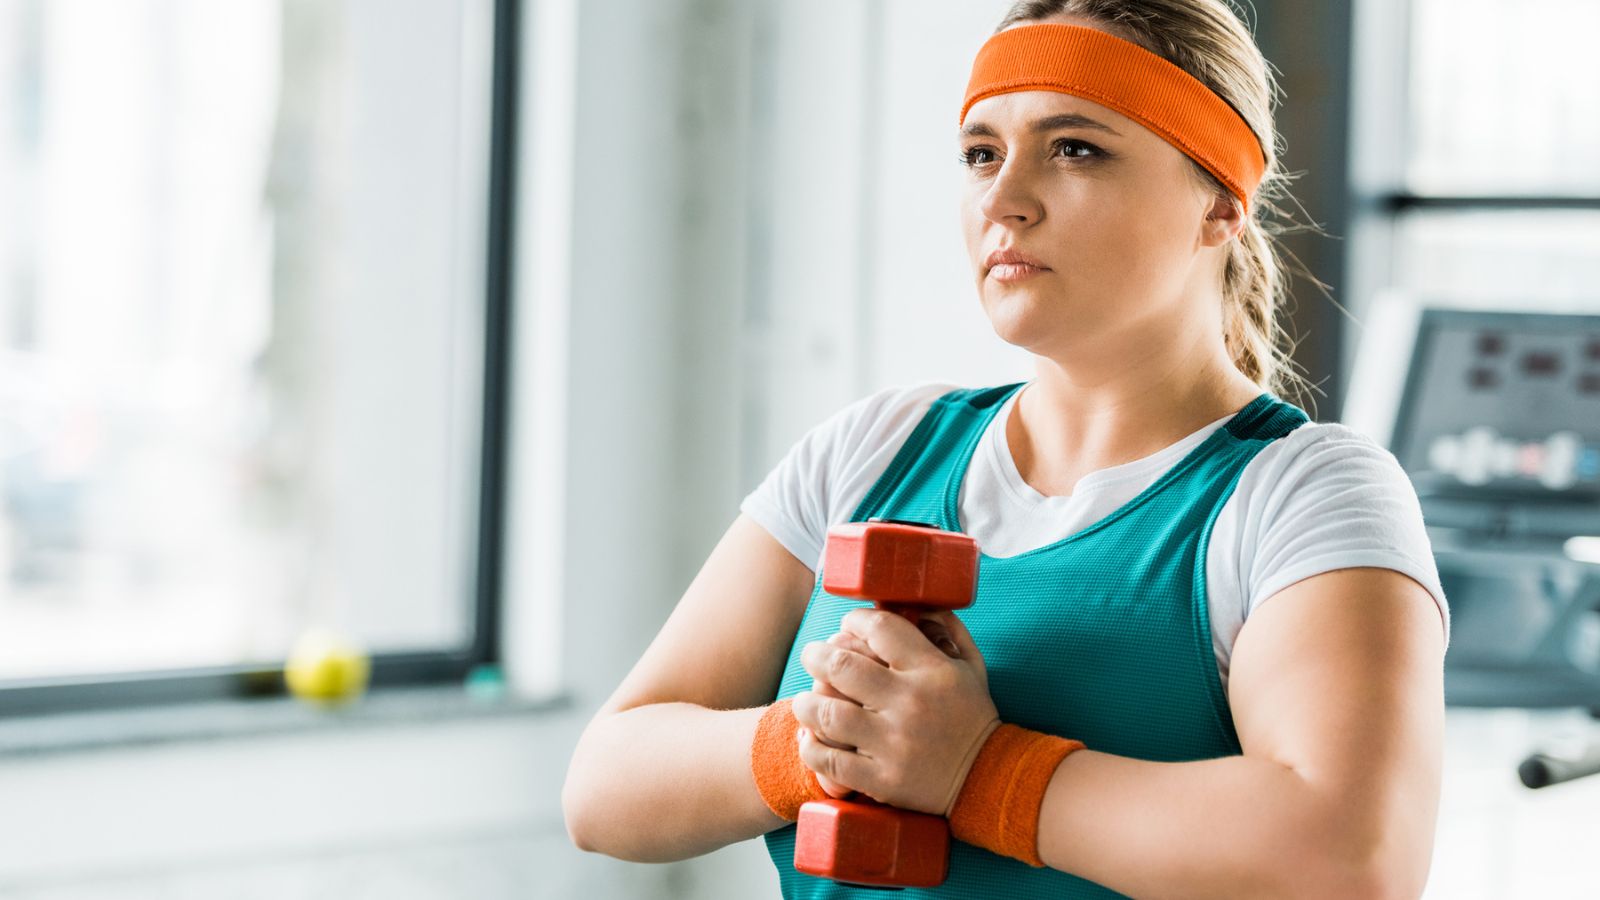 <p>Are you paying for a gym membership you barely use? These monthly fees can be a significant drain on your resources. If your gym visits are infrequent, it might be more cost-effective to switch to pay-per-visit options or exercise at home.</p>